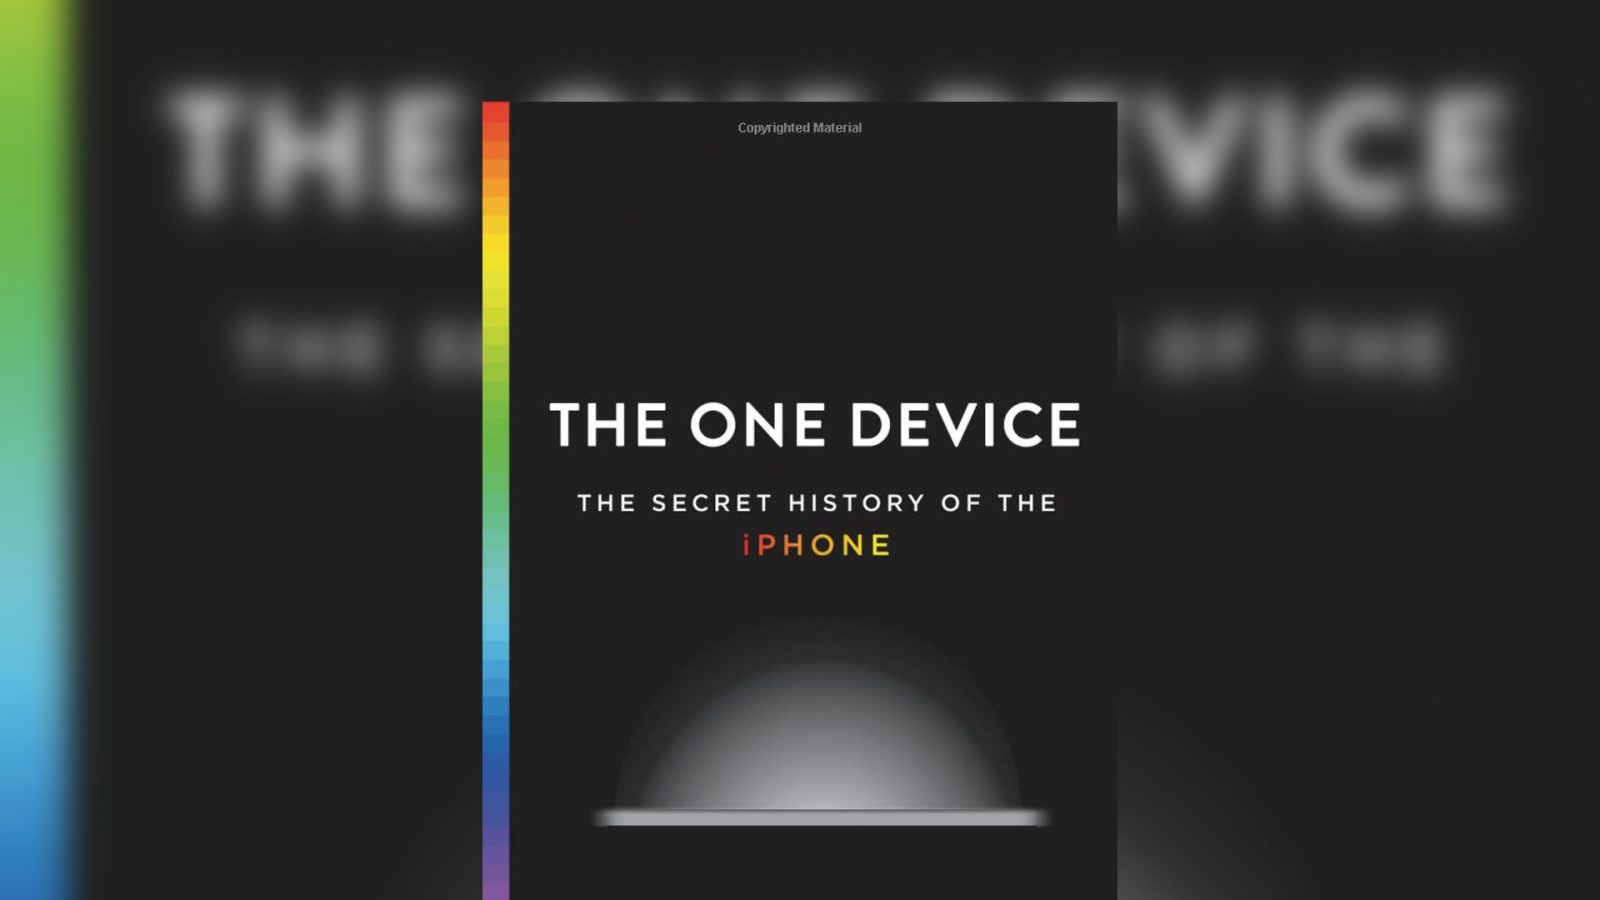 Device book. The one device. Devices книга. The one книга. The one device book.